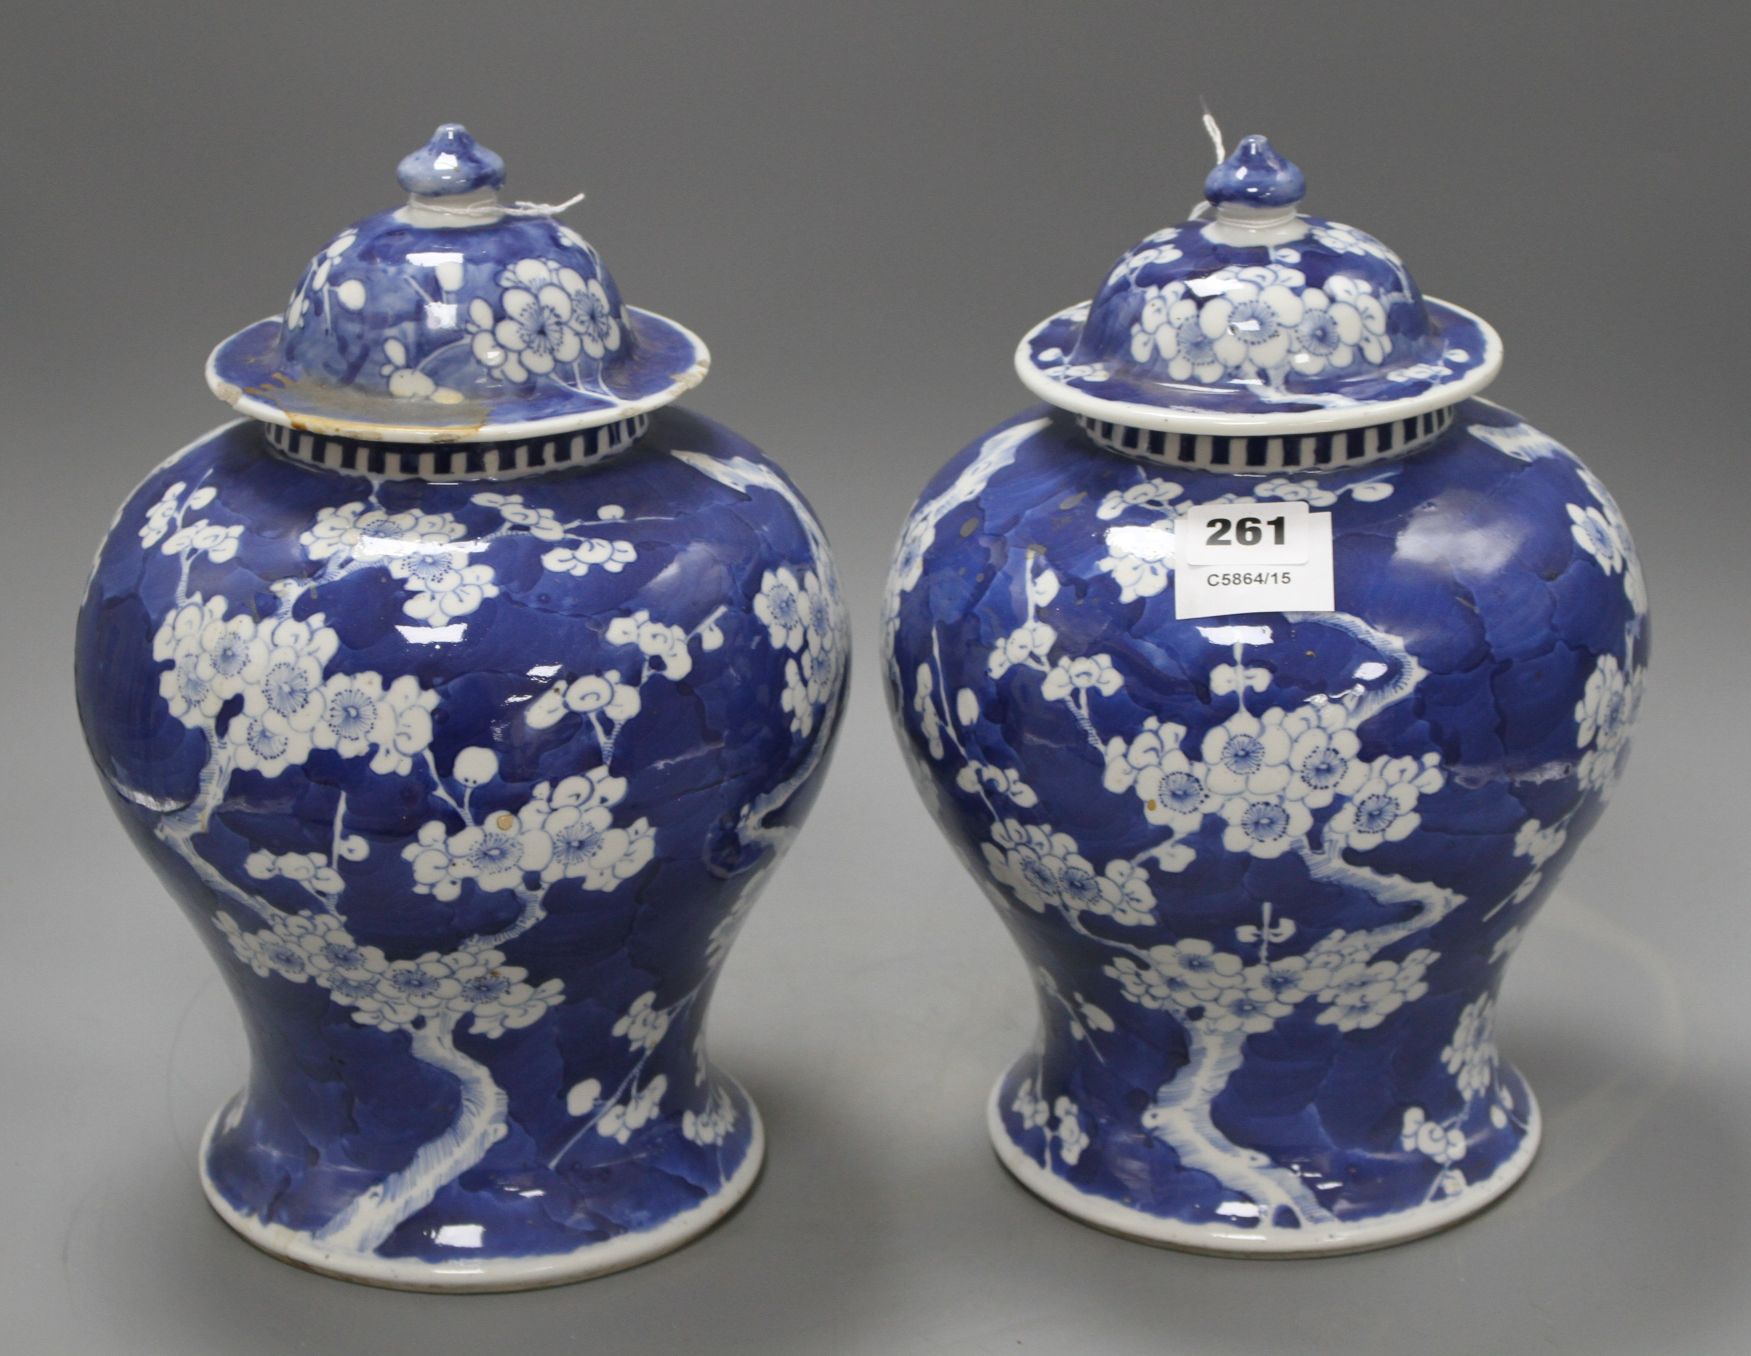 A pair of late 19th century Chinese prunus pattern baluster vases and covers, height 29cm Condition: